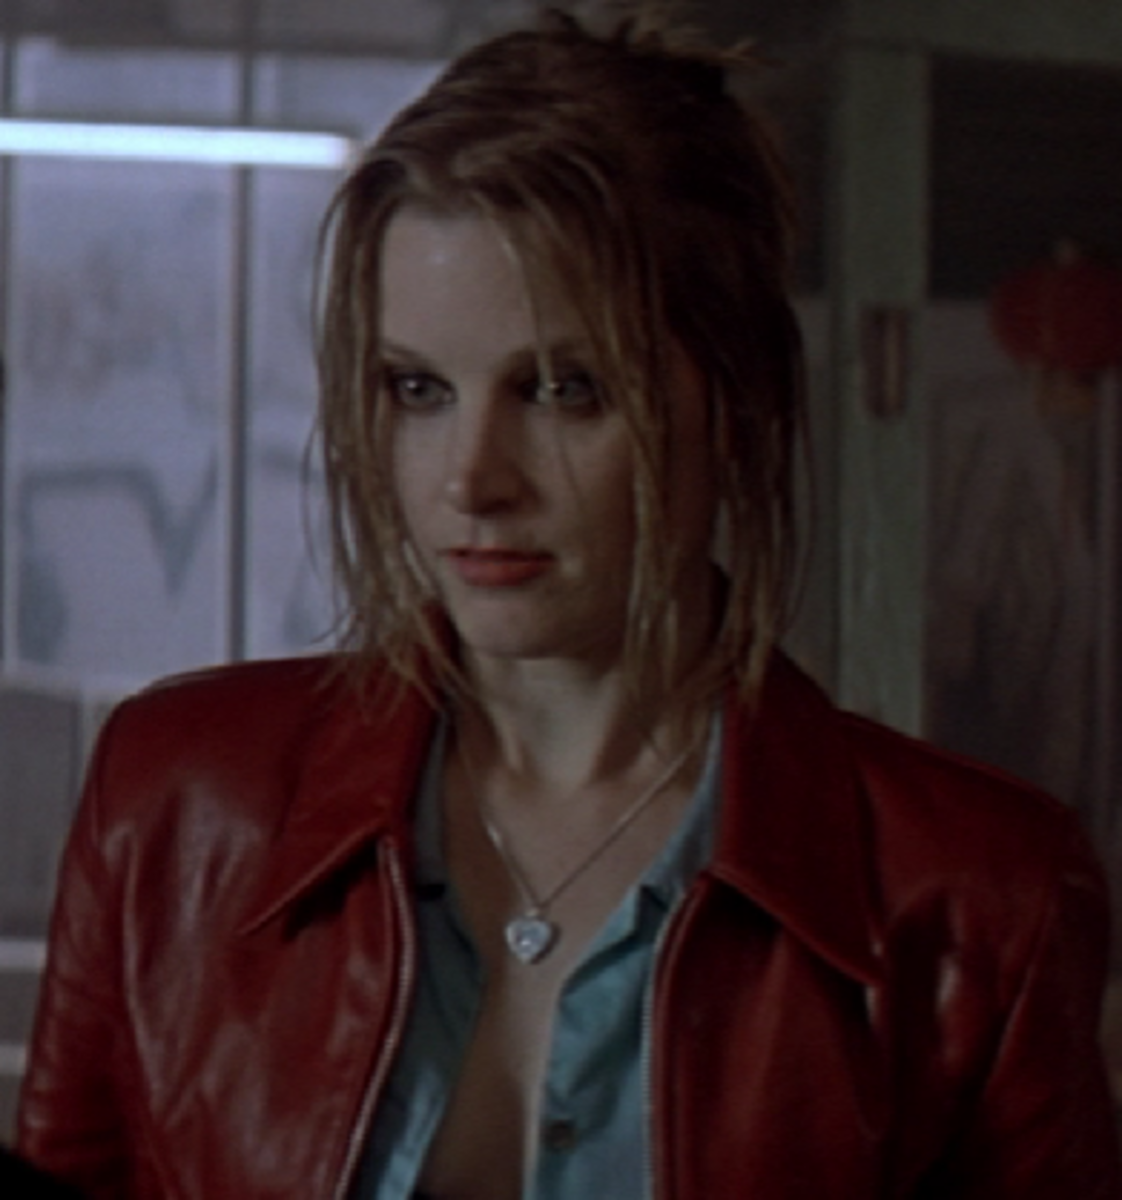 The film is one of Bridget Fonda's final roles before her retirement in 2002 and considering her talents, she deserved more than this.